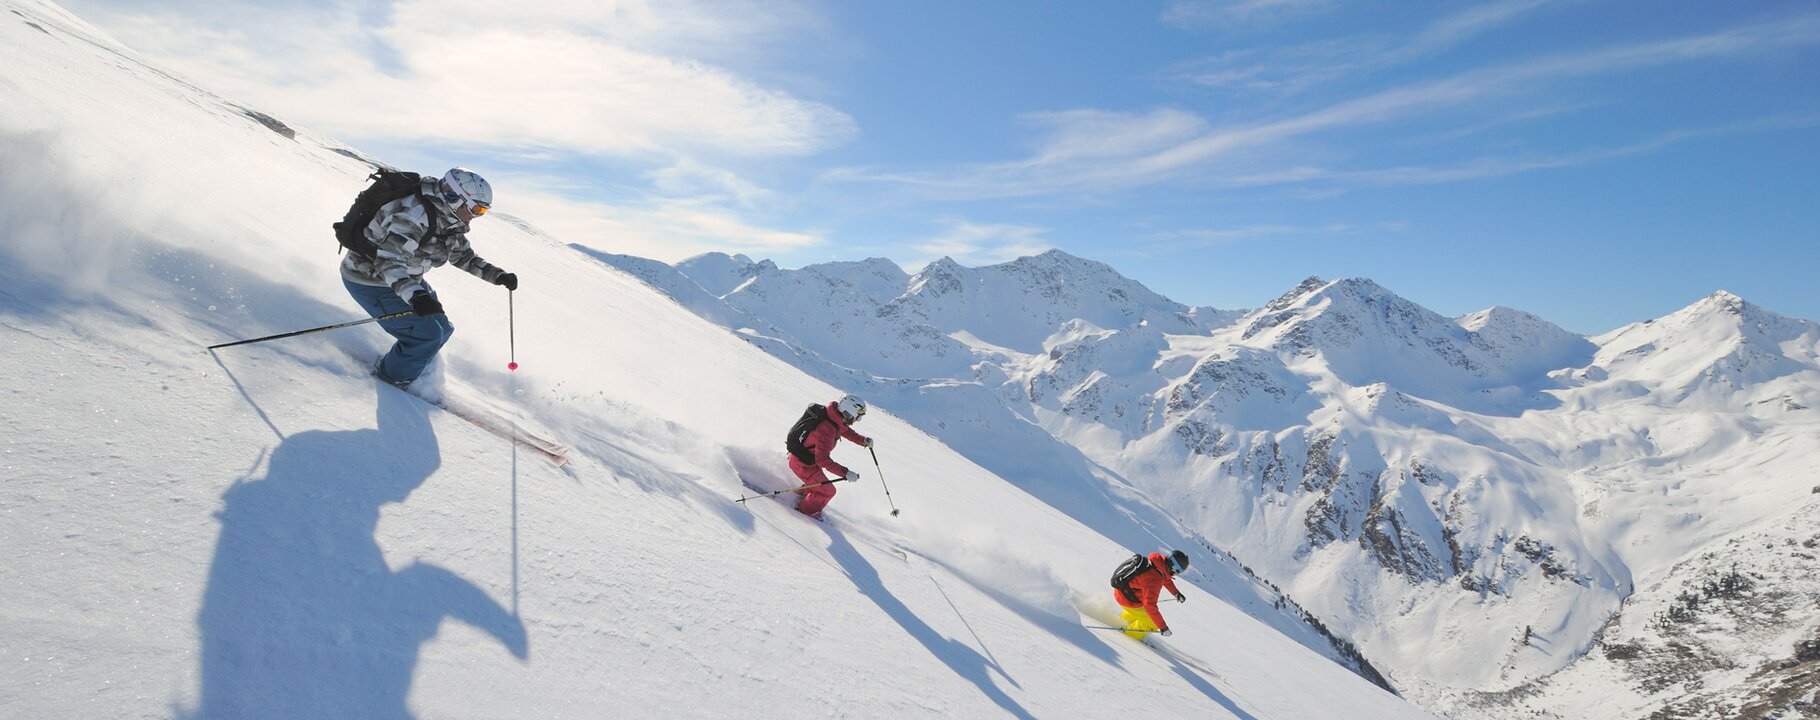 Skiing in Serfaus-Fiss-Ladis in Tyrol at great weather conditions in Austria | © Sepp Mallaun